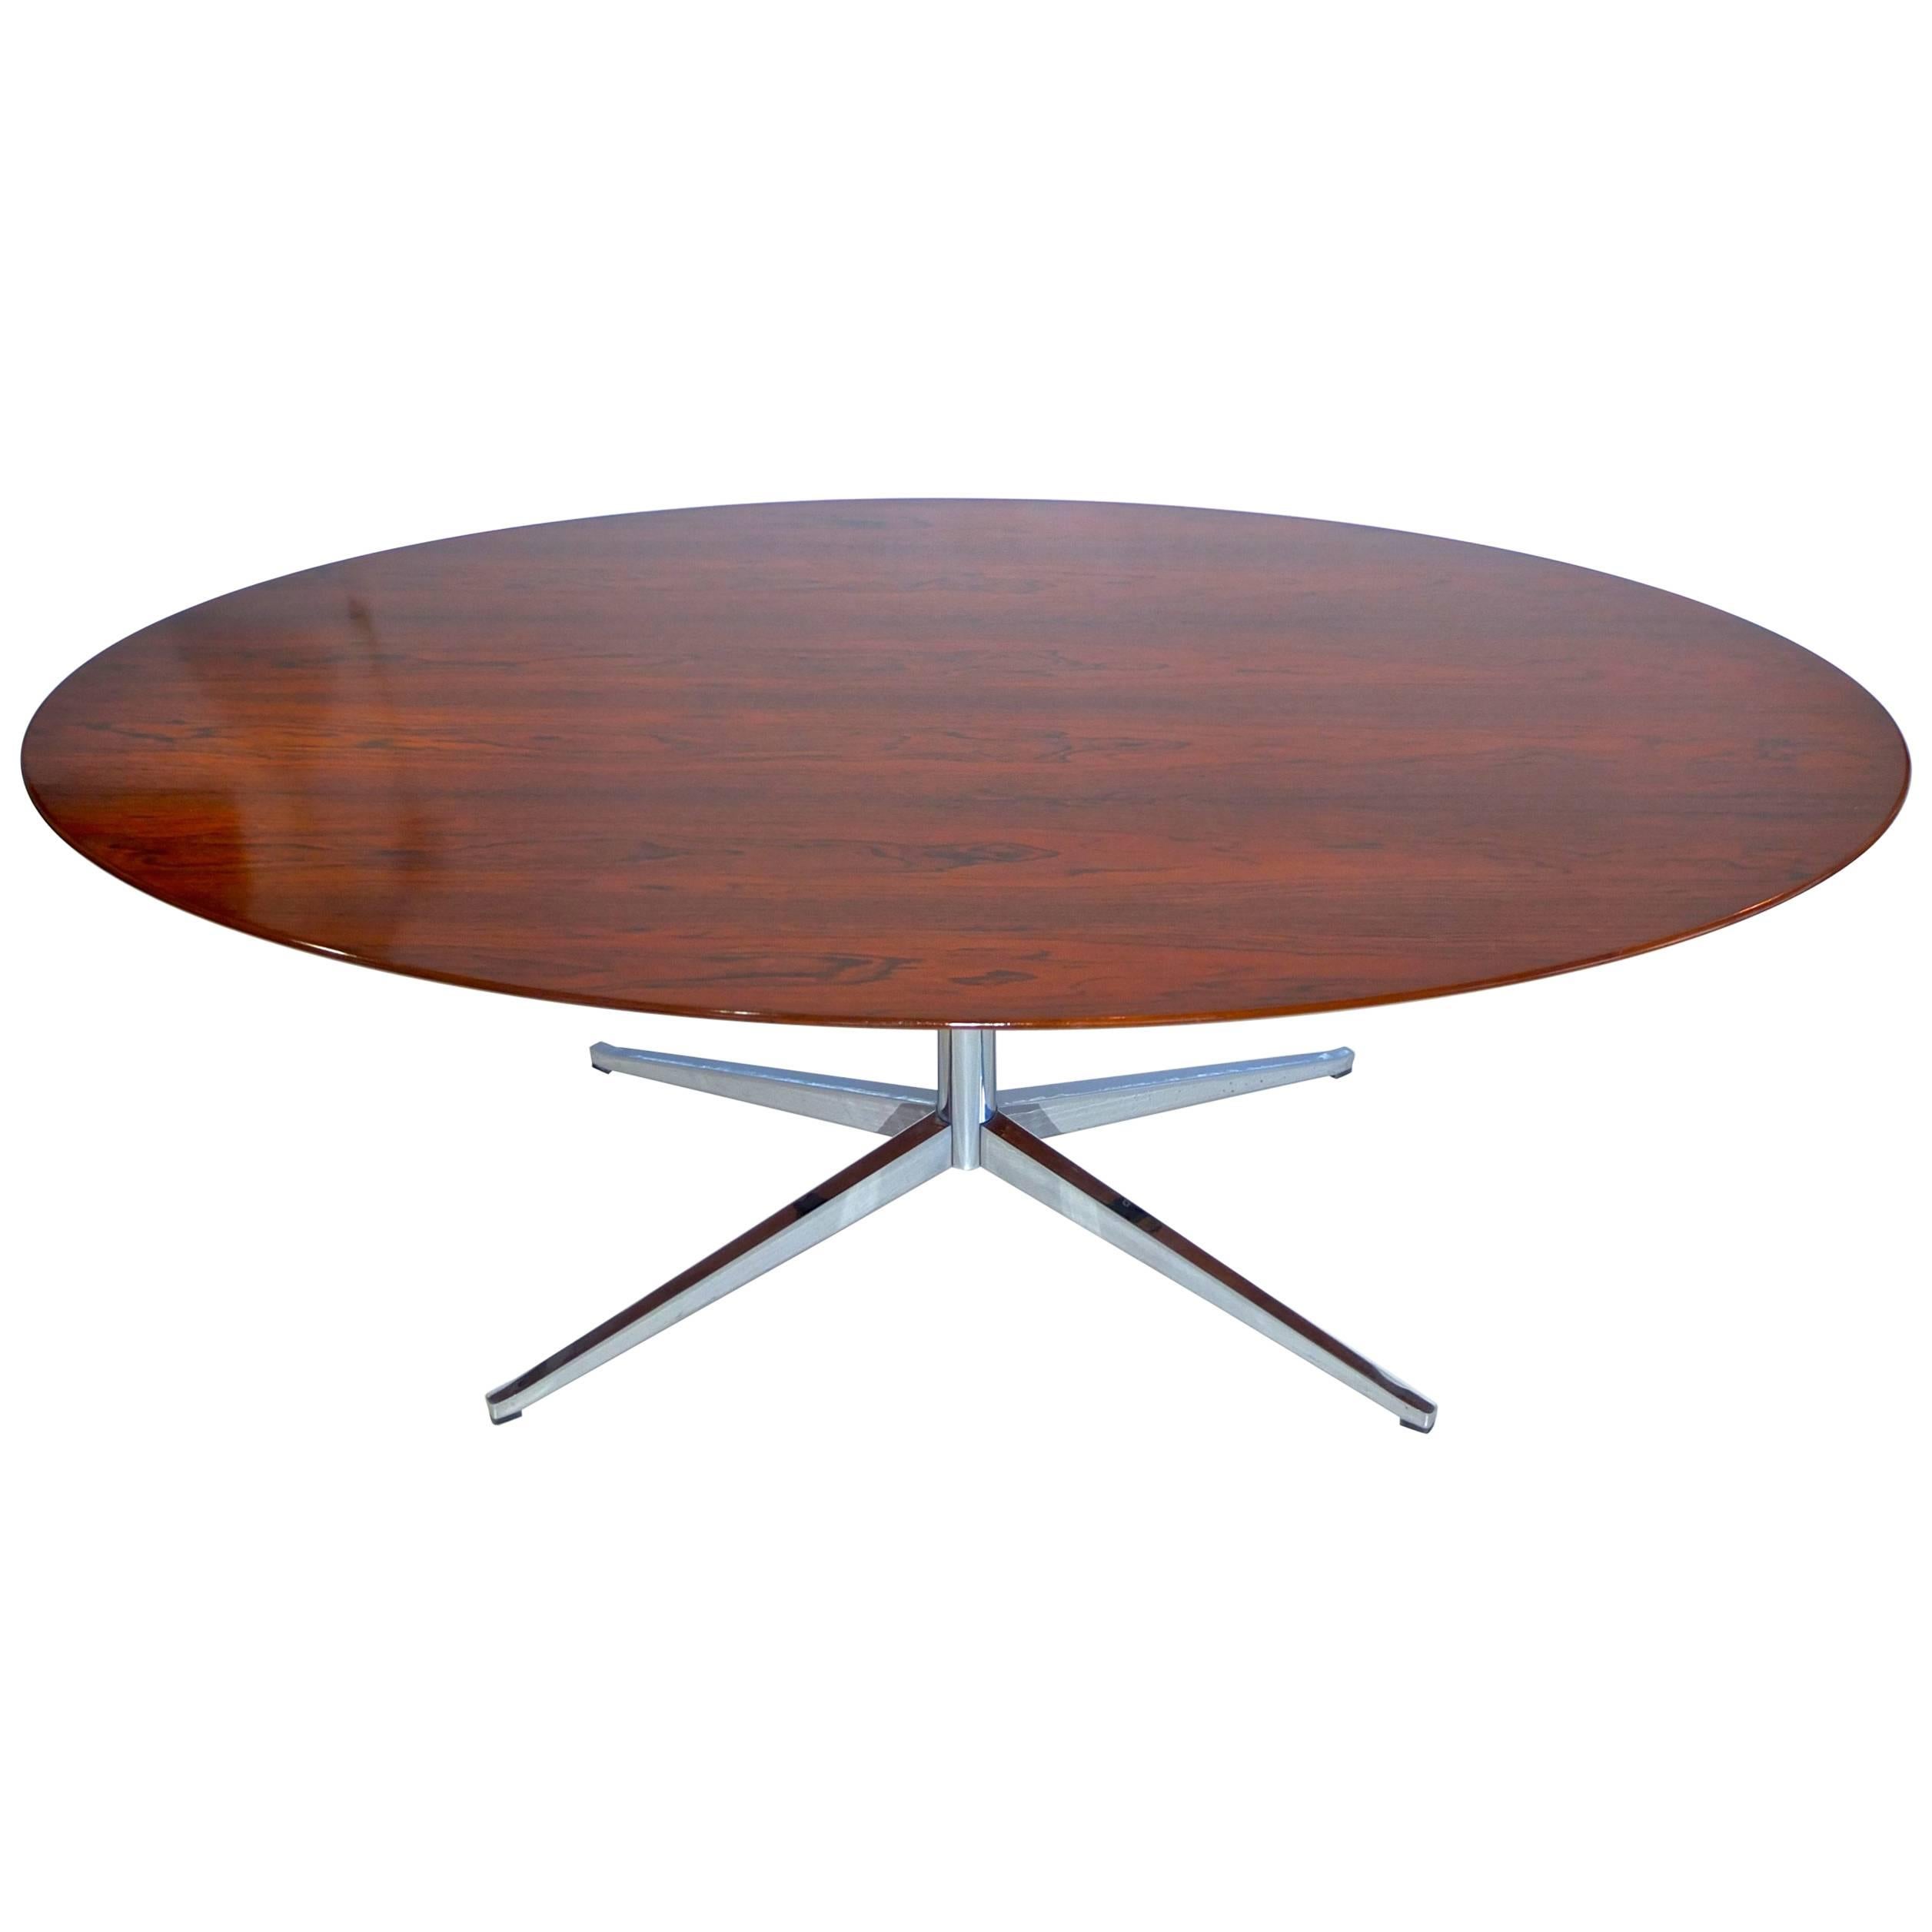 Brazilian Rosewood Elliptical Oval Executive Table Desk by Florence Knoll